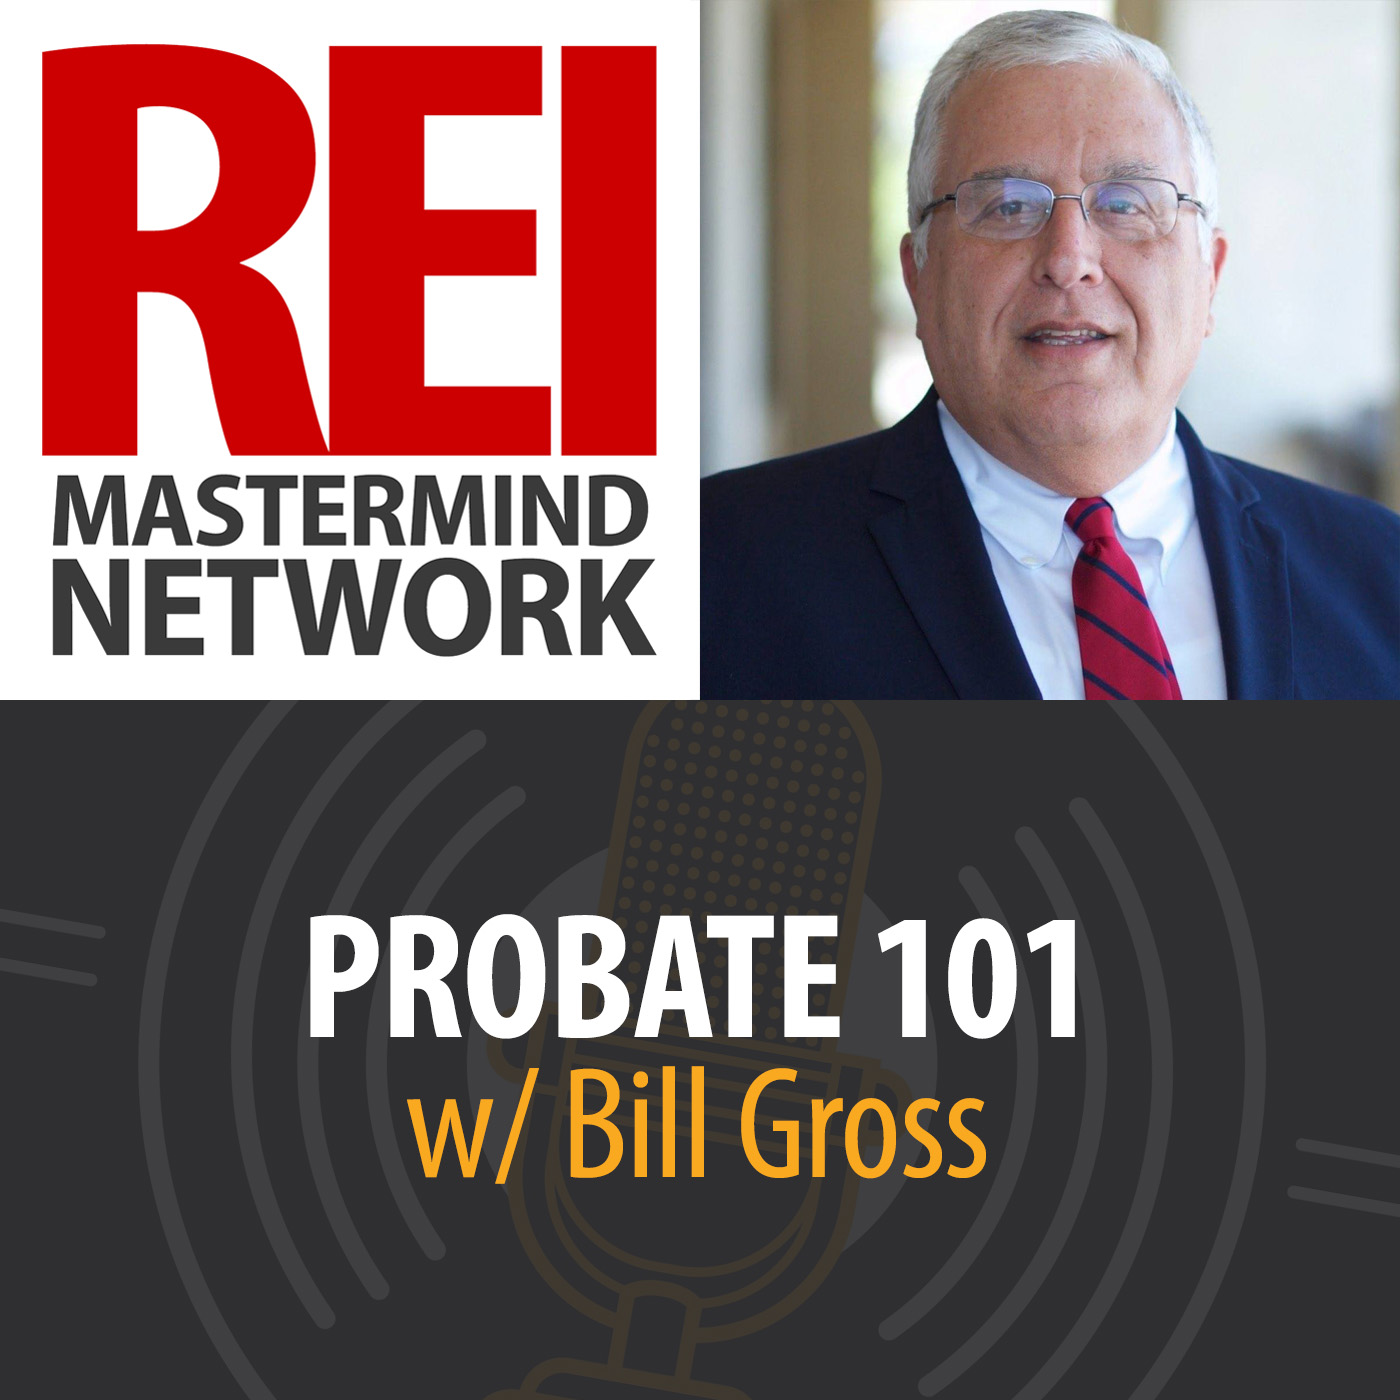 Probate 101 with Bill Gross Image